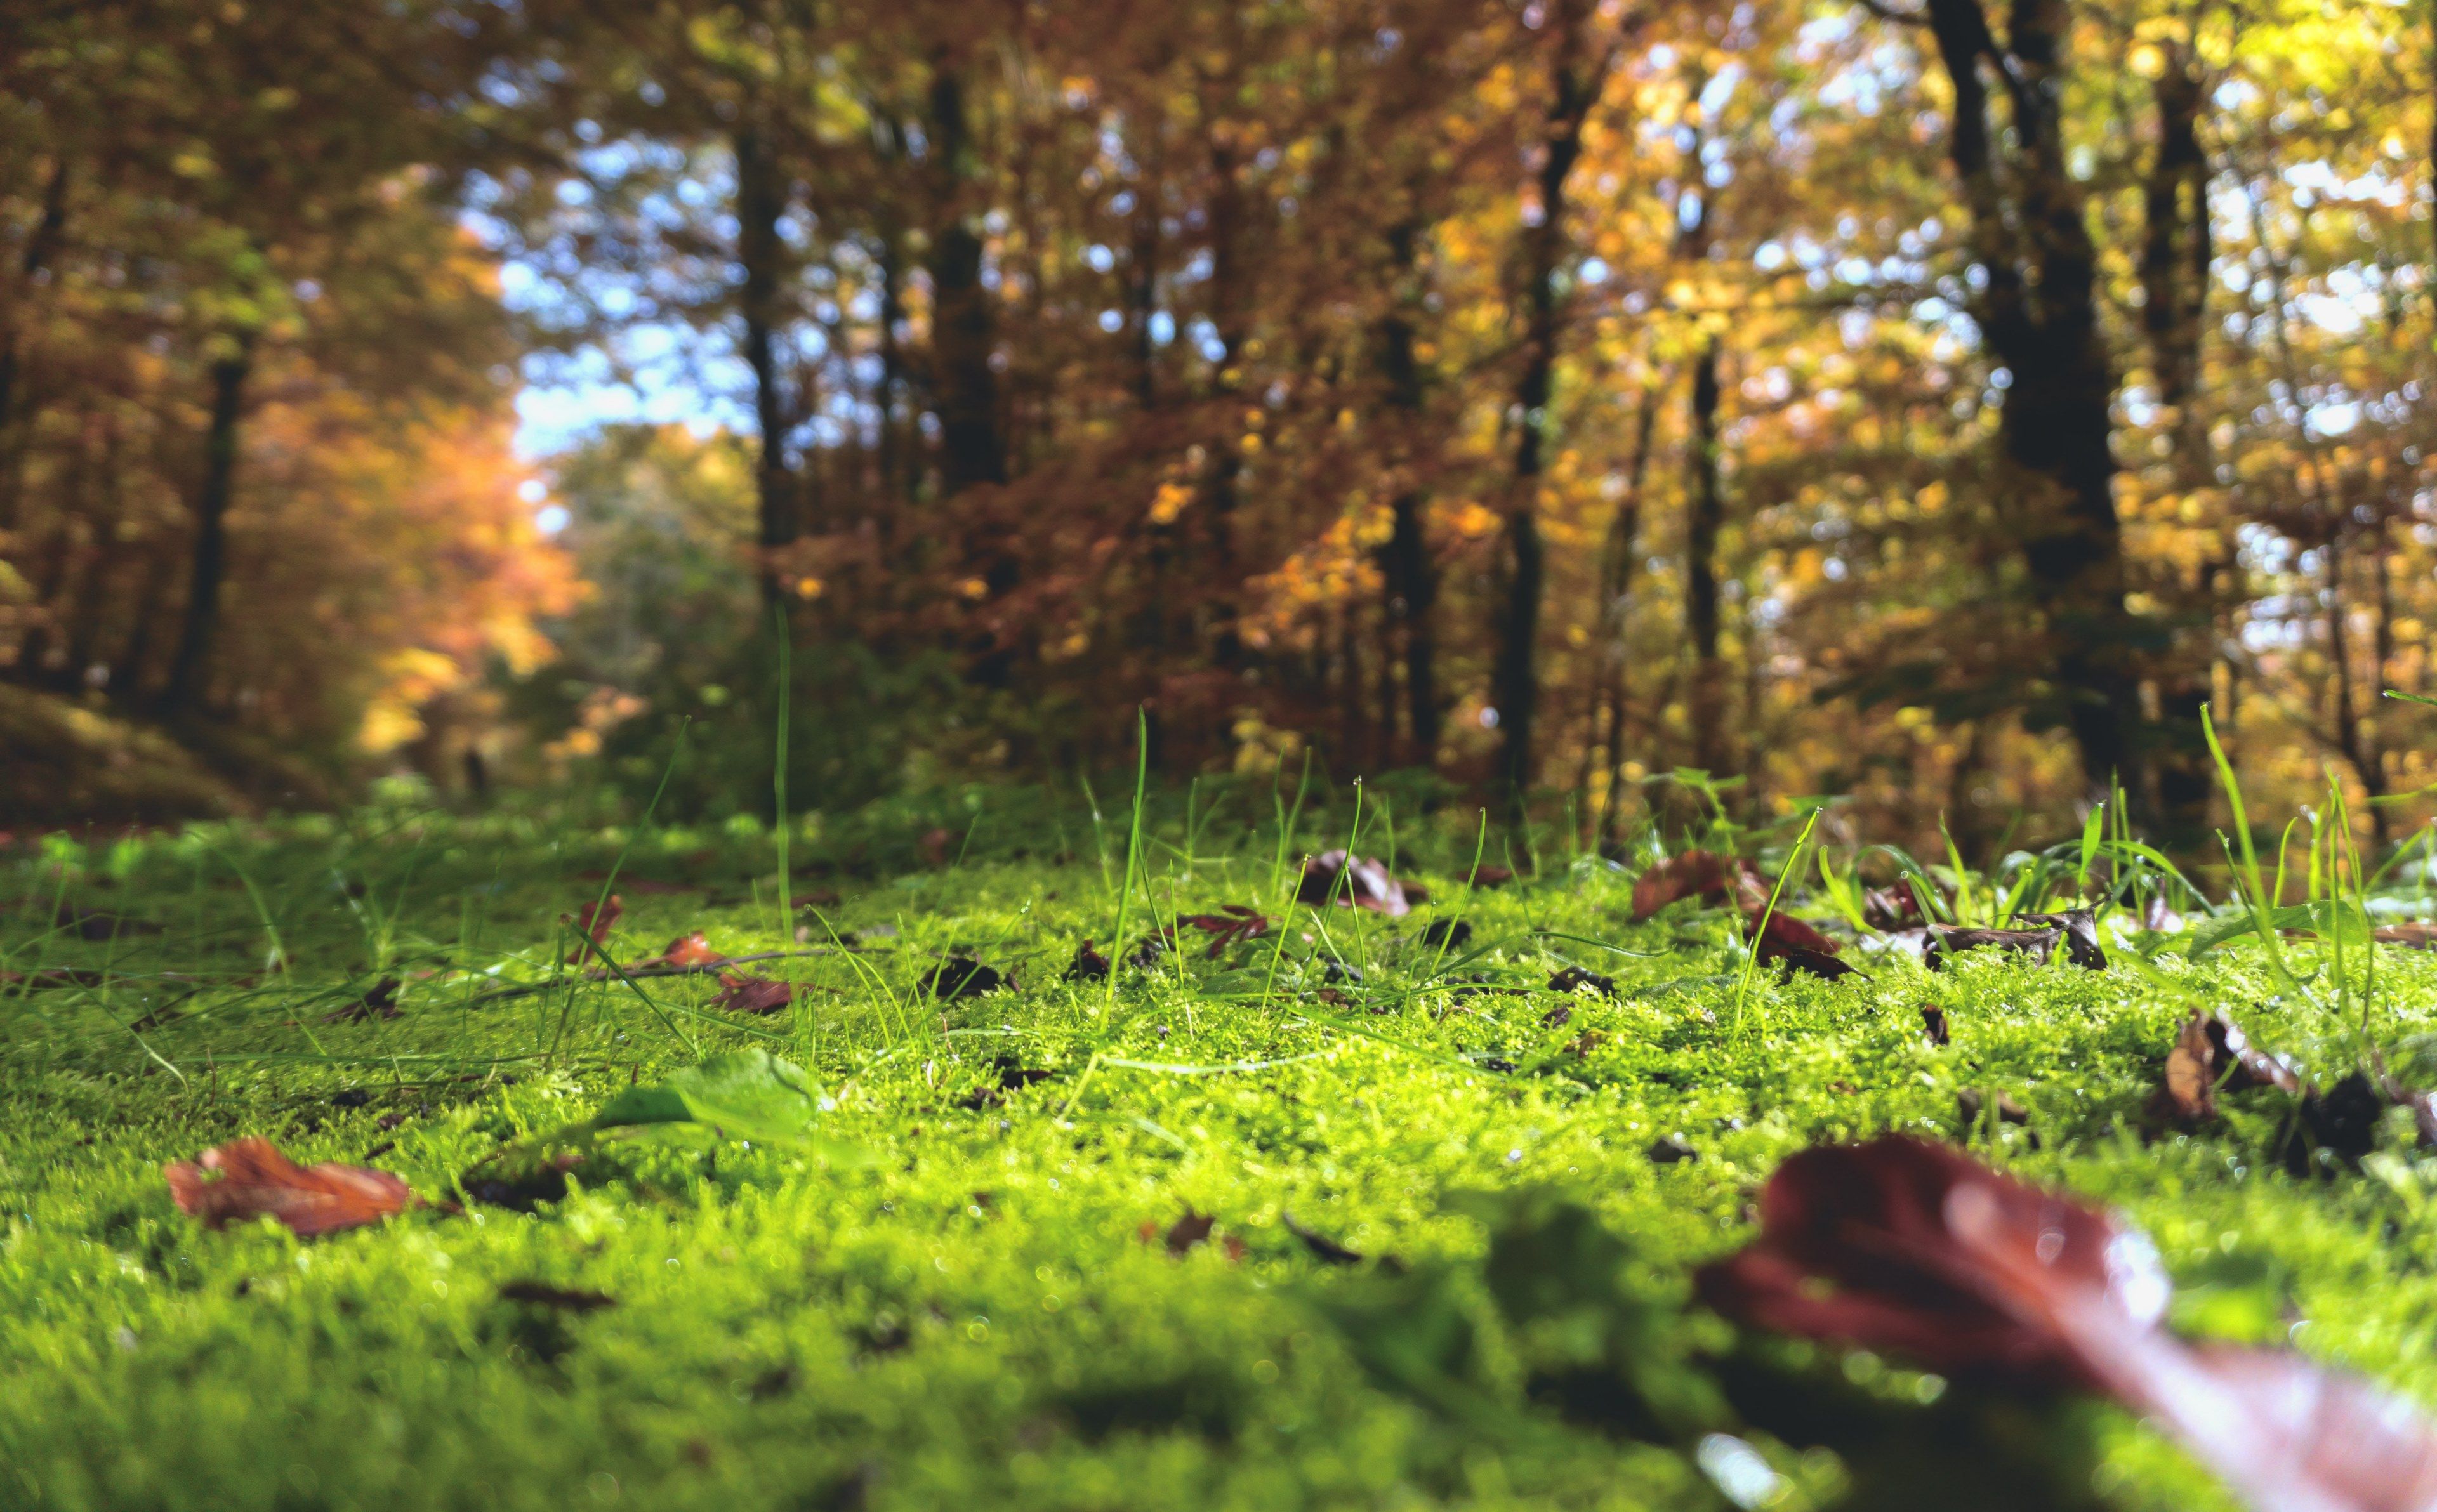 Wallpaper / autumn outdoor forest and ground HD 4k wallpaper